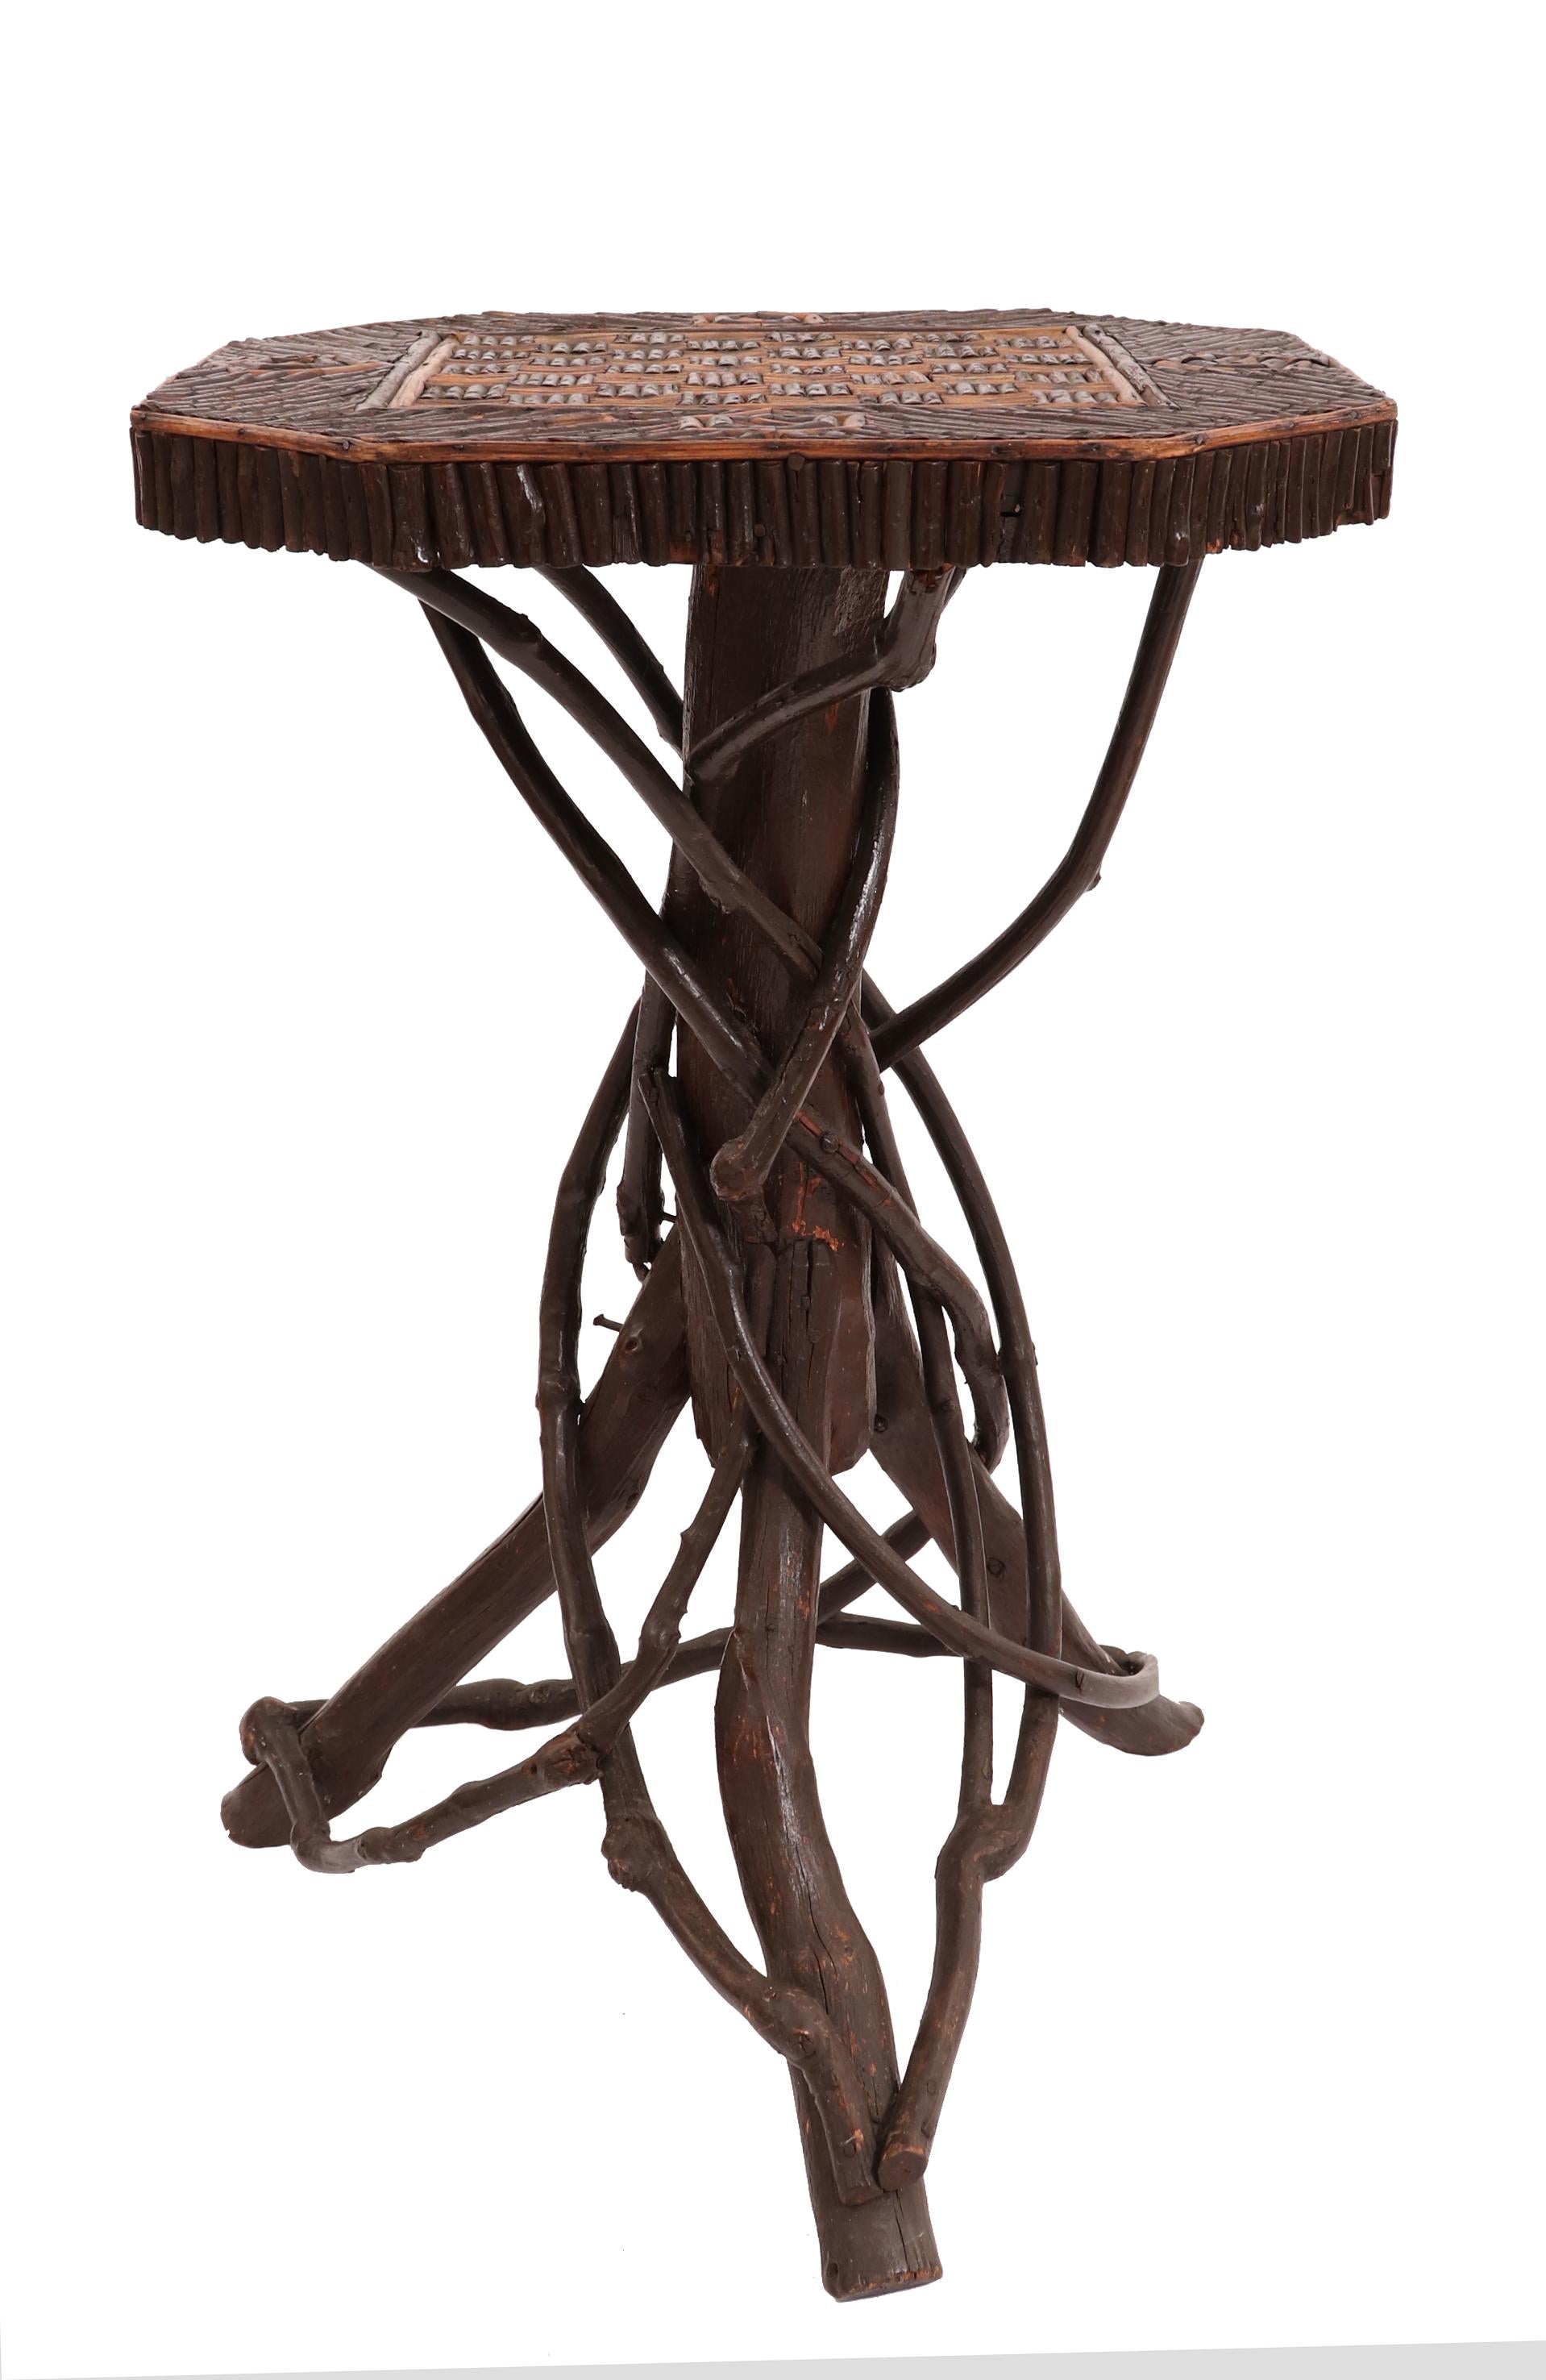 Rustic Adirondack style twig and wood game table with natural branch base and inlaid twig game board tabletop.